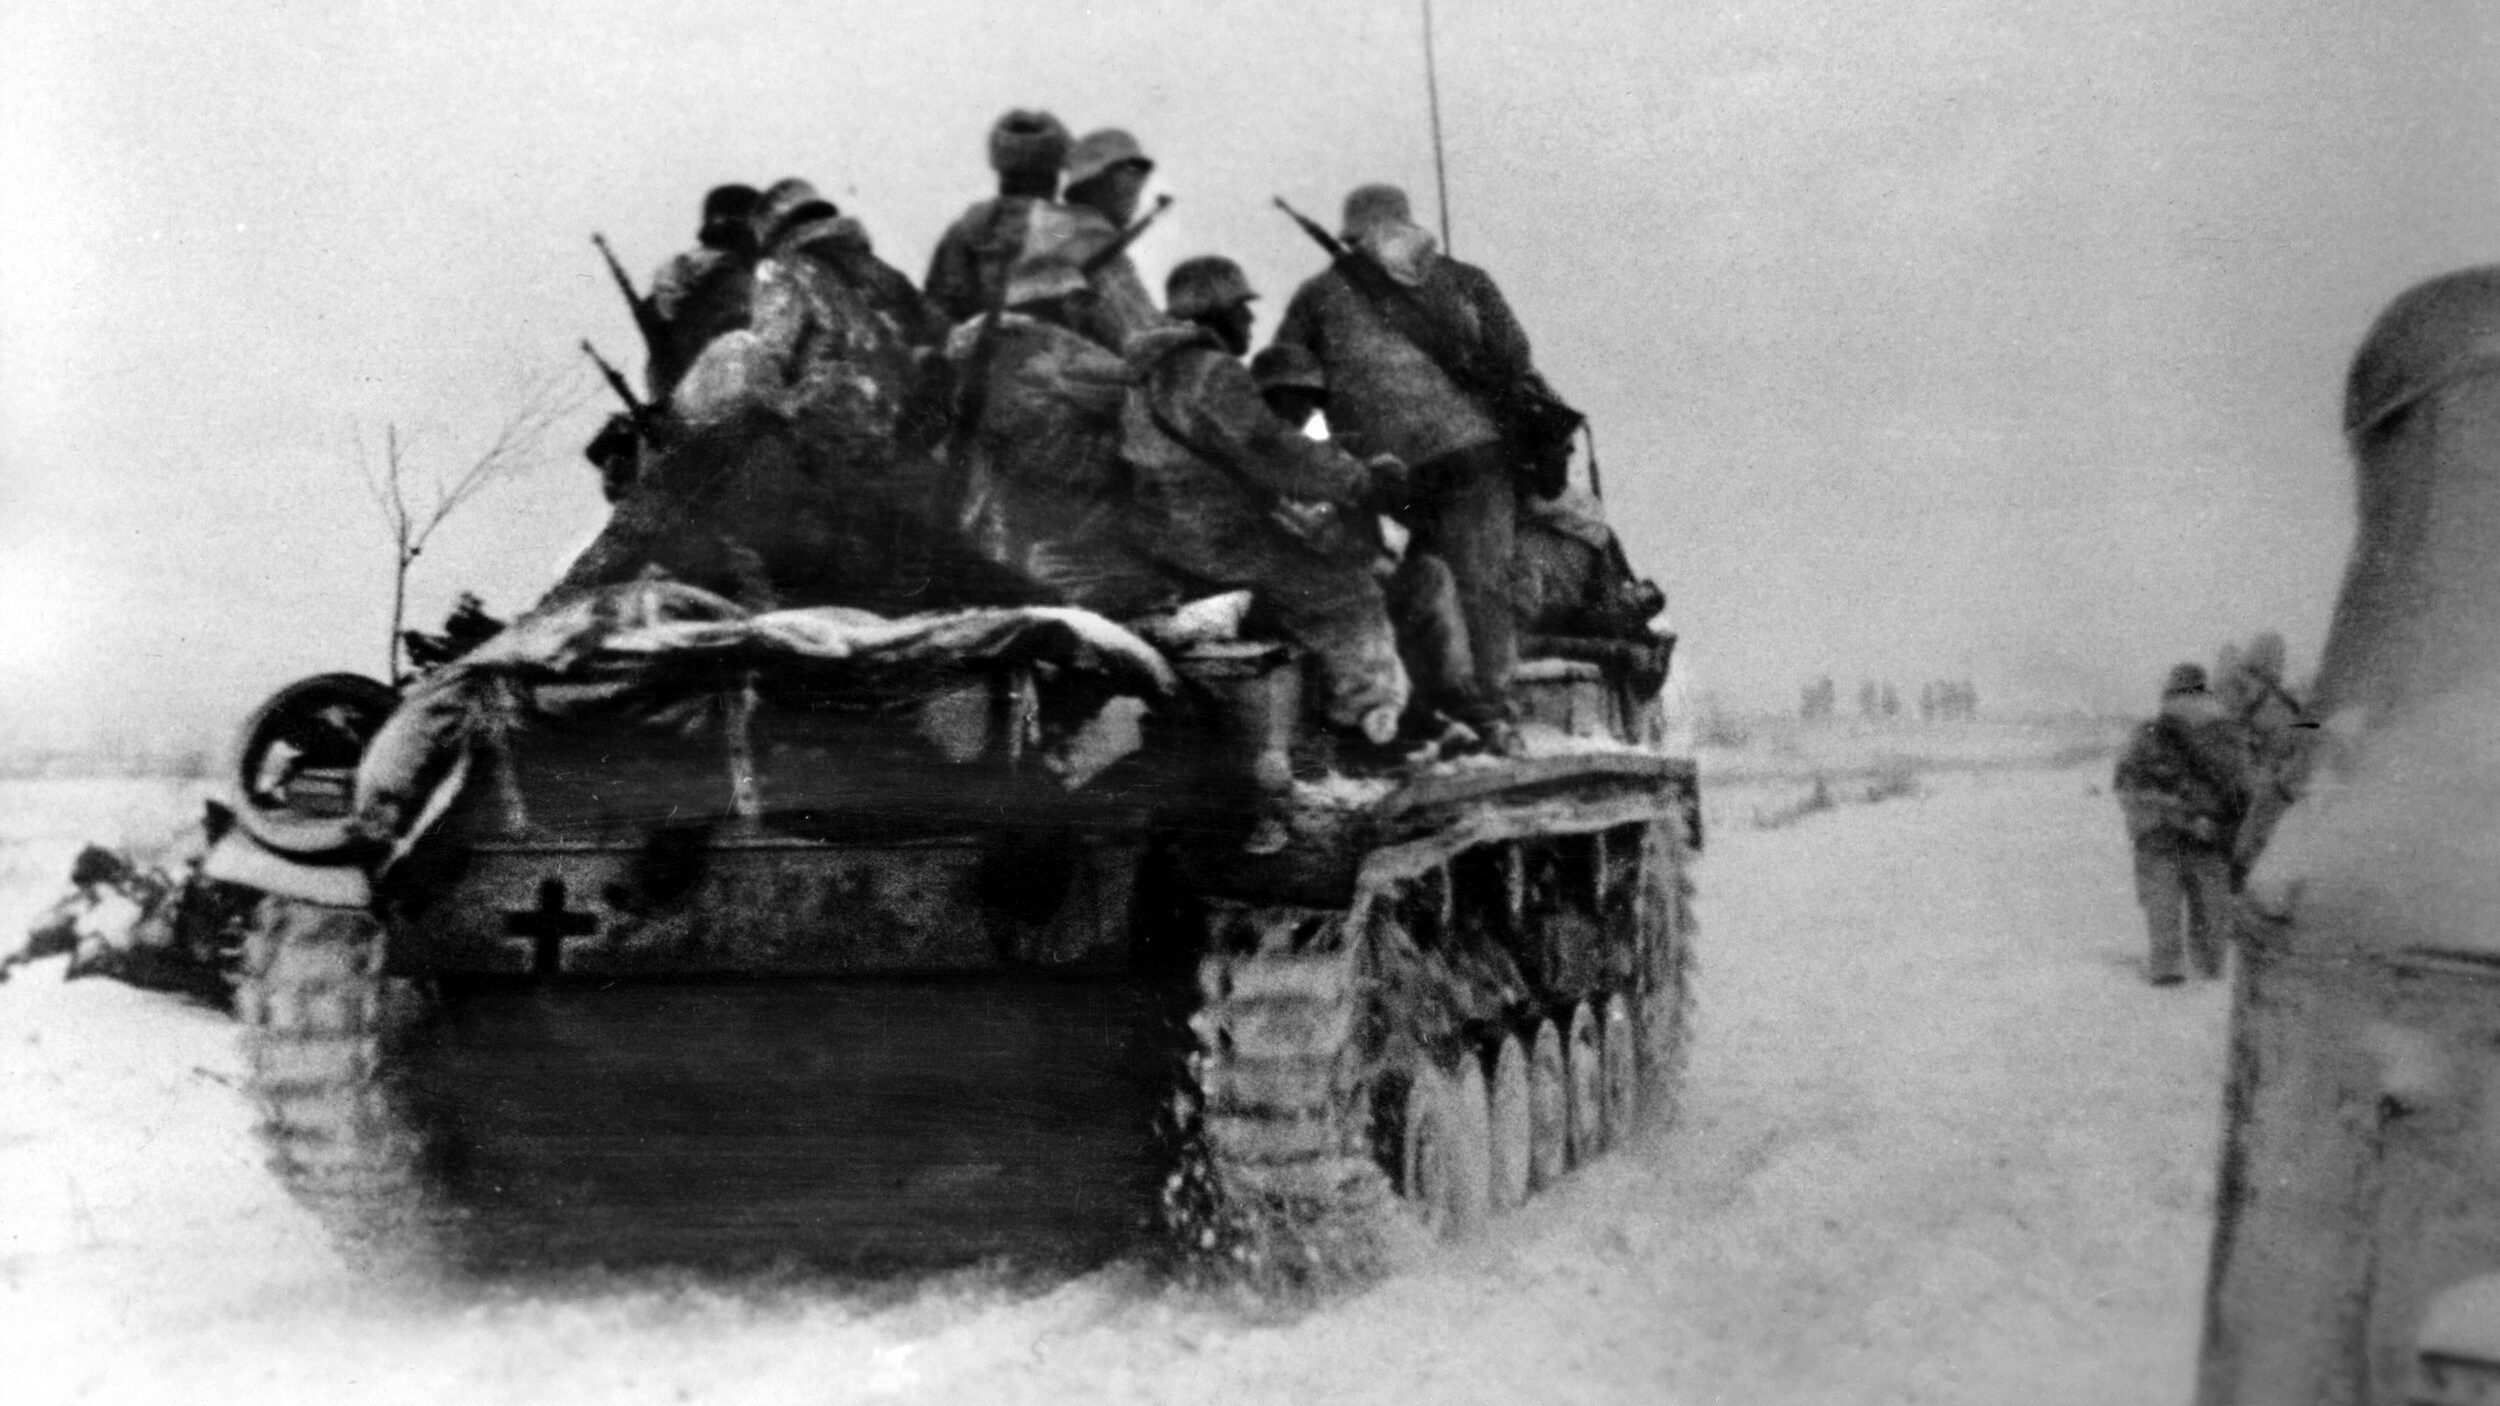 During the crucial Battle of Stalingrad, a German Sturmgeschutz III self-propelled assault gun rumbles across the snow covered landscape while Wehrmacht soldiers hitch a ride.